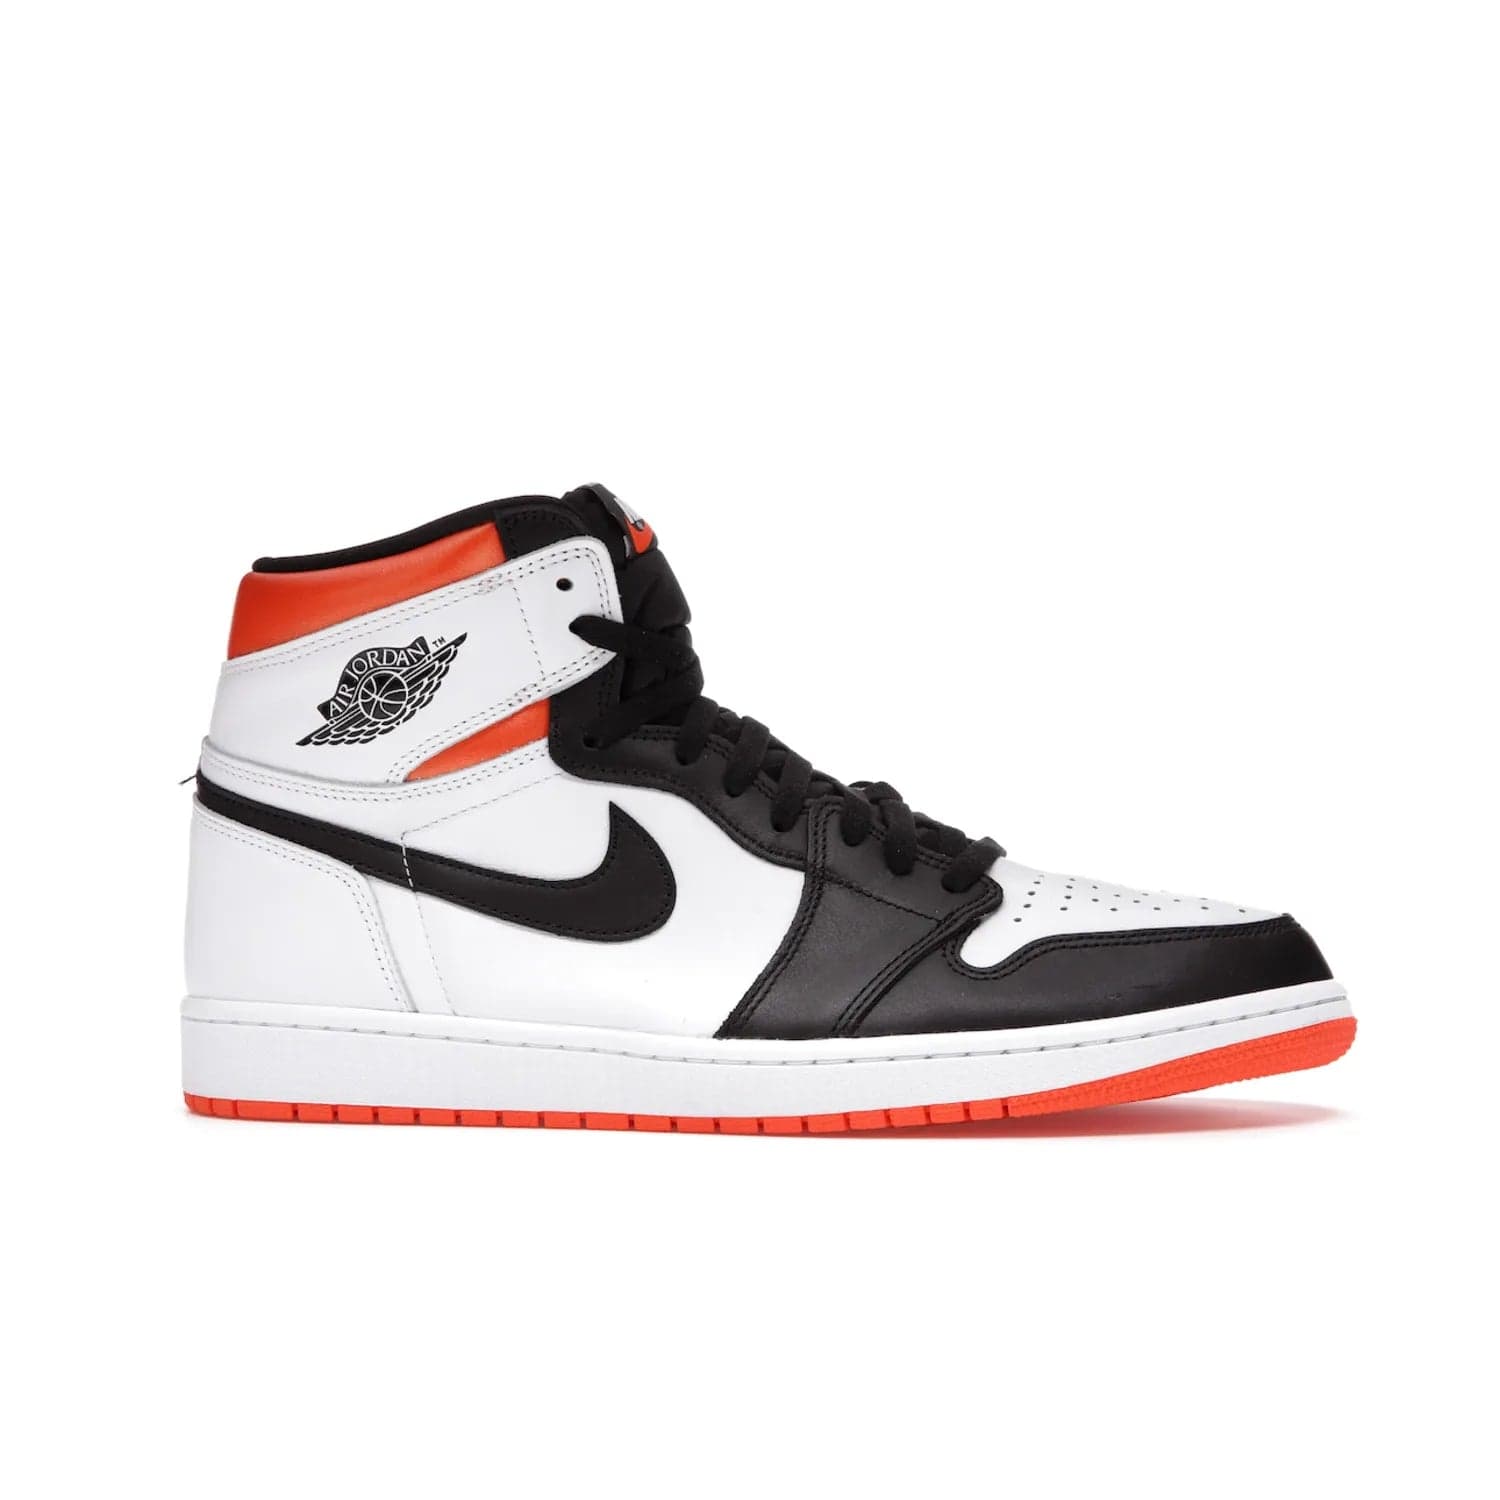 Jordan 1 Retro High Electro Orange - Image 2 - Only at www.BallersClubKickz.com - This Air Jordan 1 Retro High Electro Orange features a white leather upper with black overlays and vibrant Hyper Orange ankle wrap. Turn heads with this iconic design of woven tongue label and sole. Get yours today and add some serious style to your rotation.